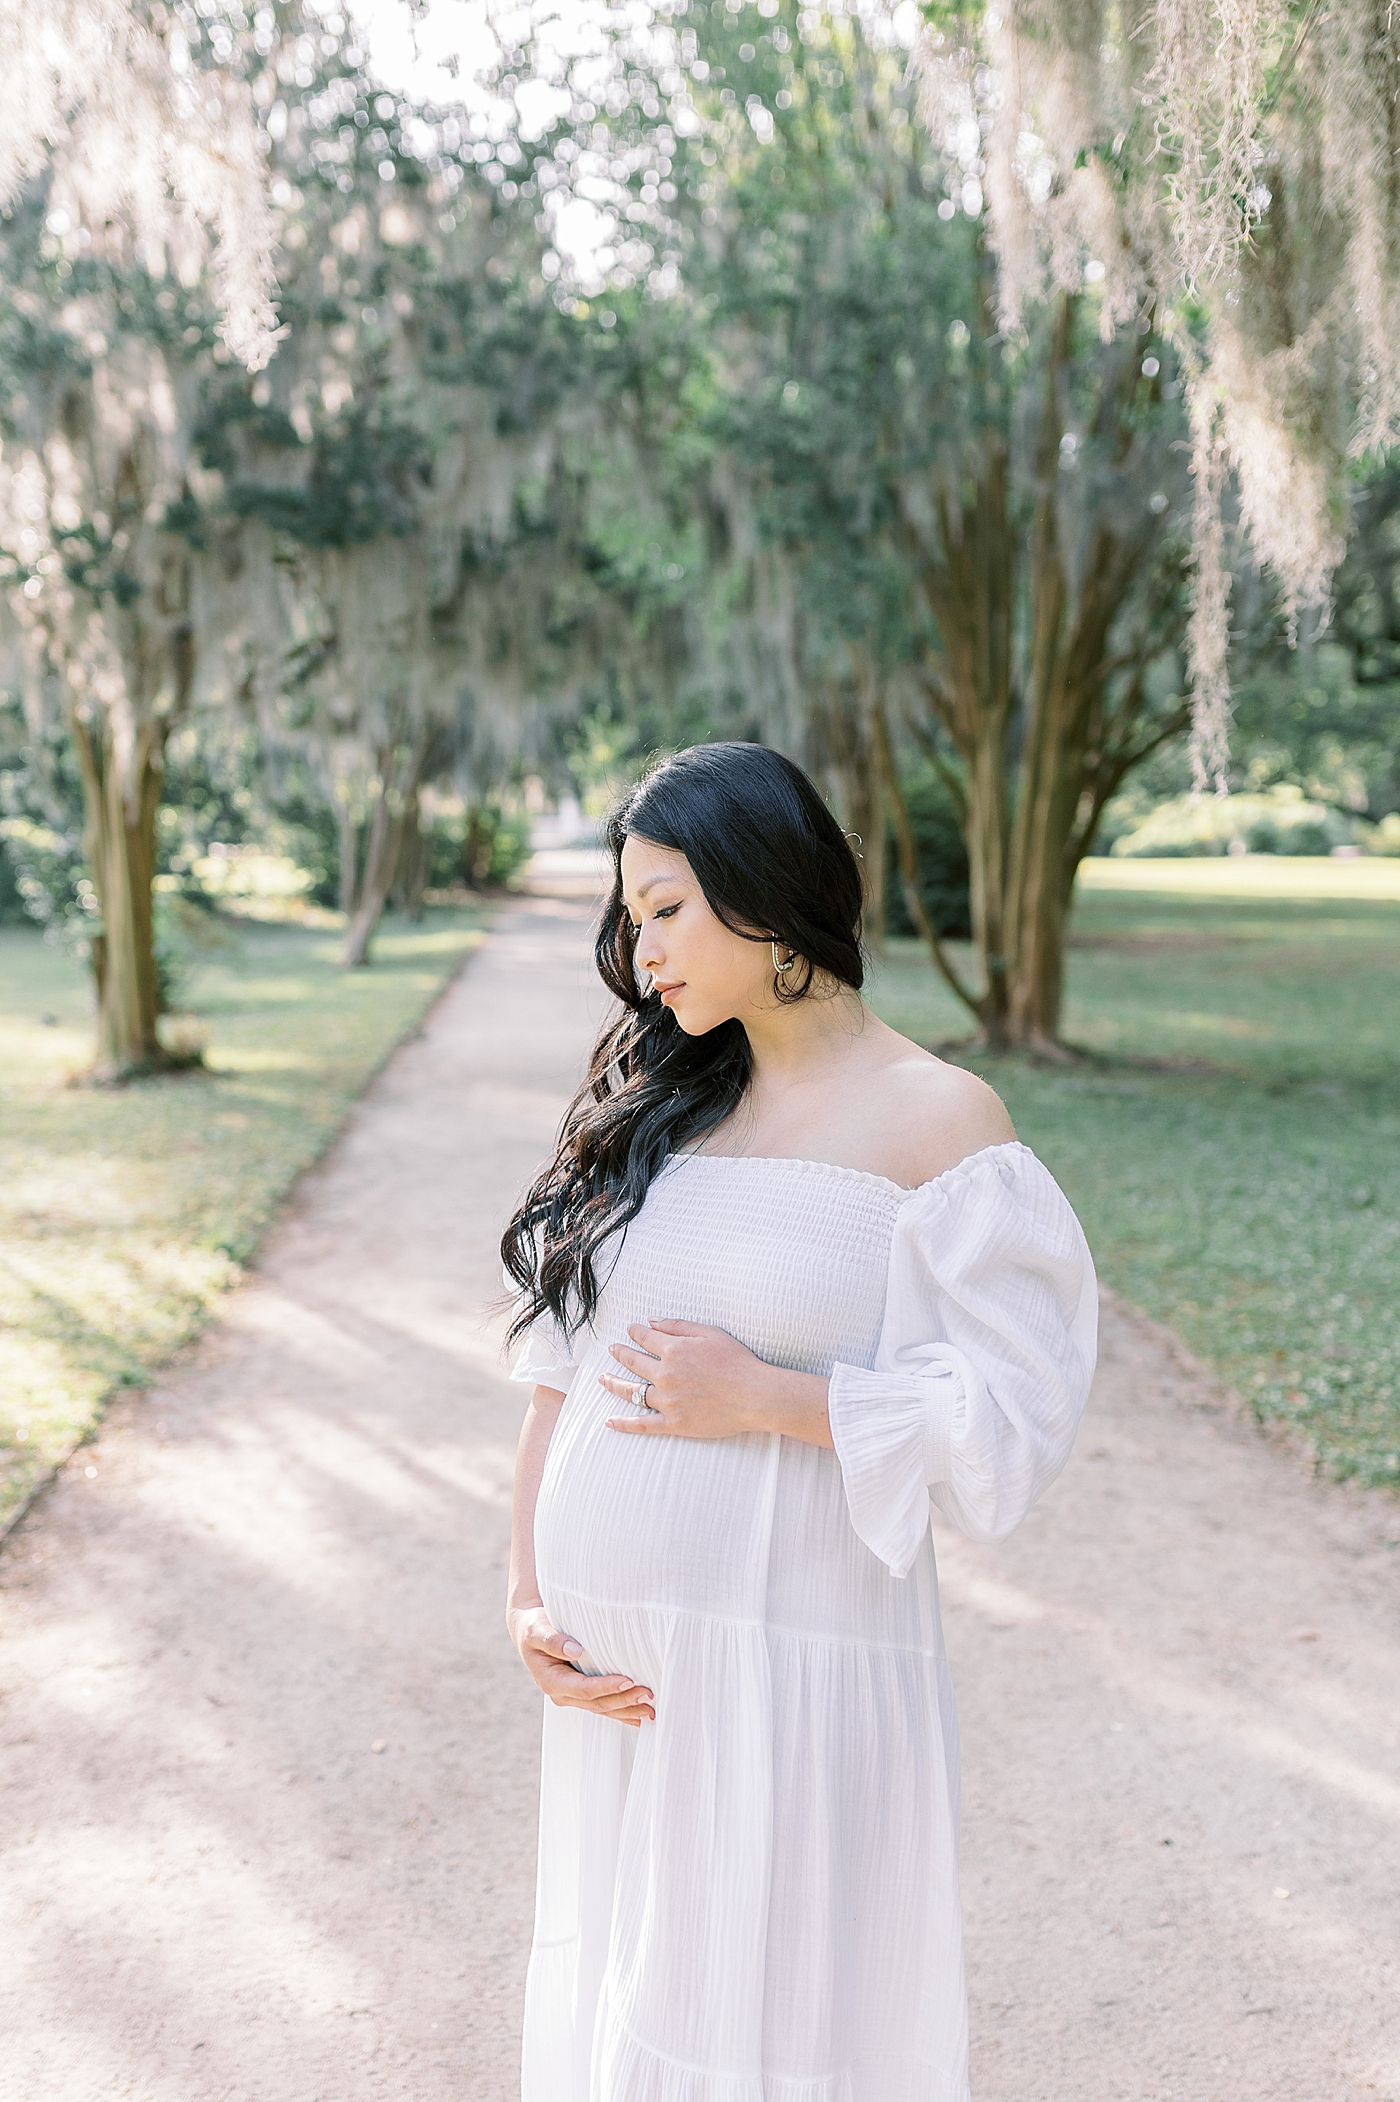 Mother to be cradling her belly | Photo by Caitlyn Motycka Photography